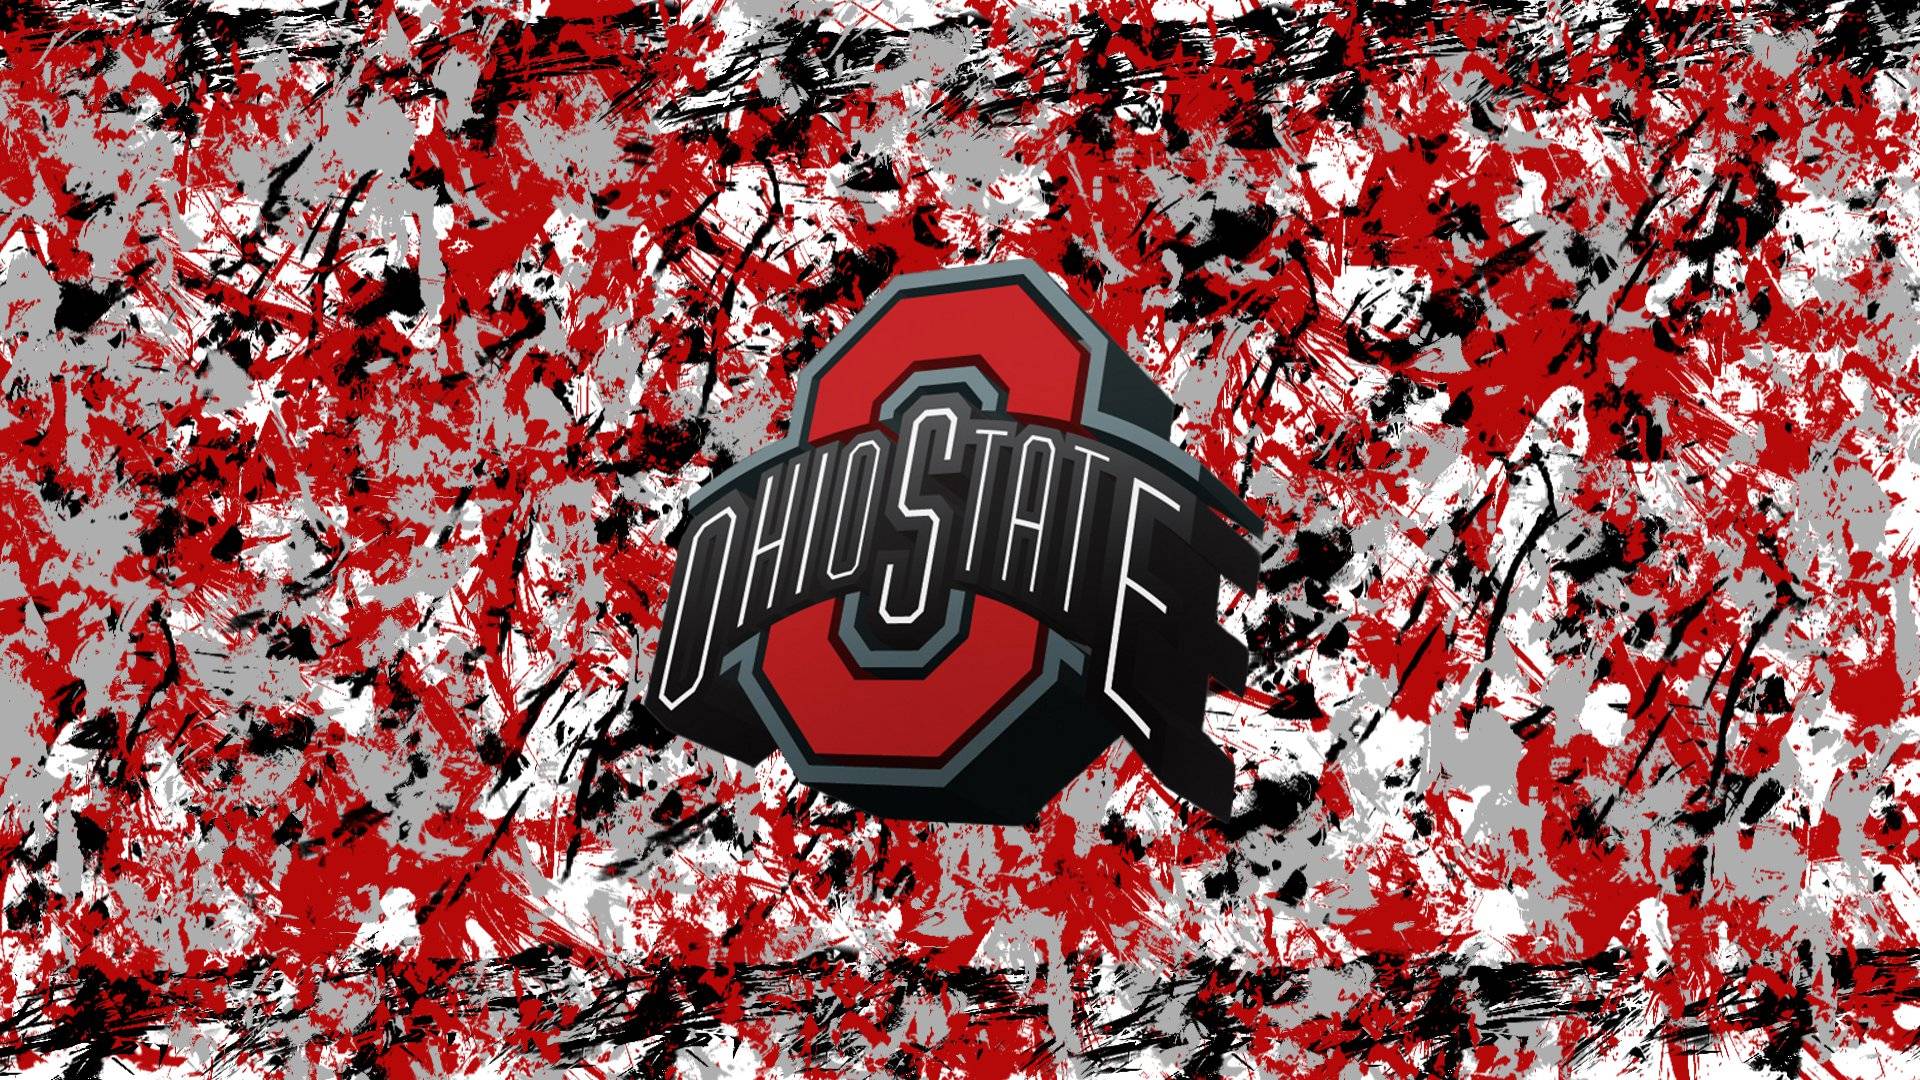 Ohio State Buckeyes Wallpapers Wallpaper Cave HD Wallpapers Download Free Images Wallpaper [wallpaper981.blogspot.com]